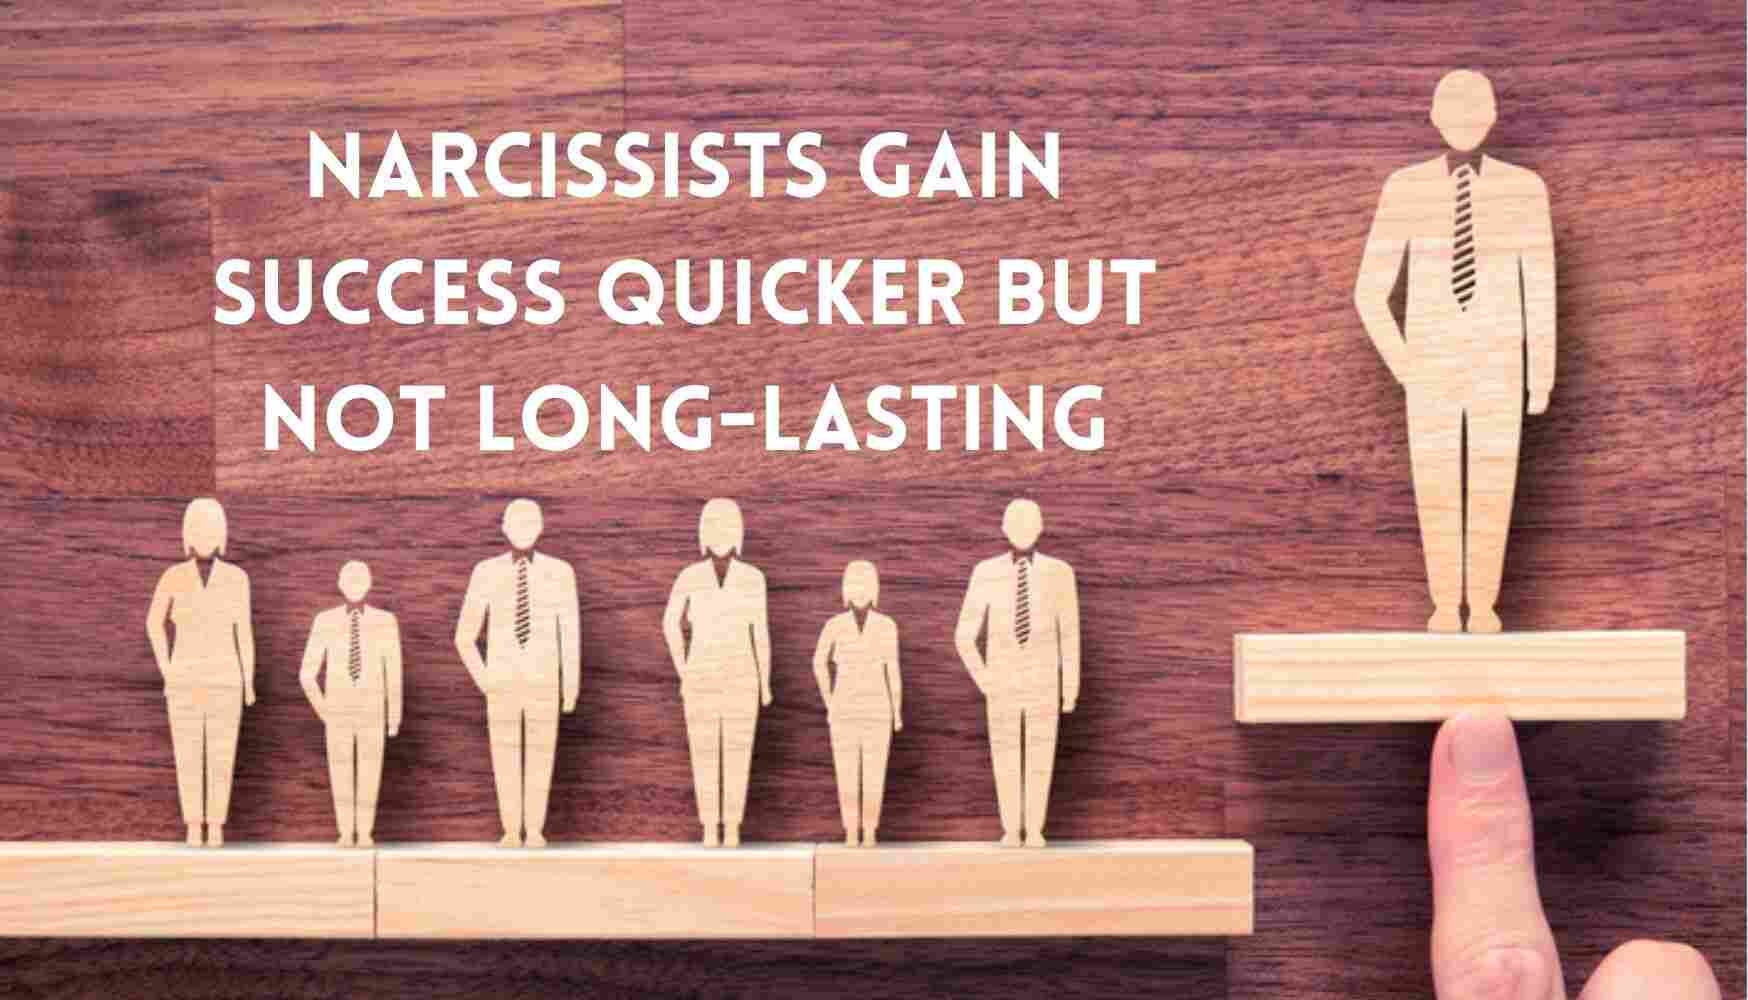 Are narcissists successful and stand out than others?